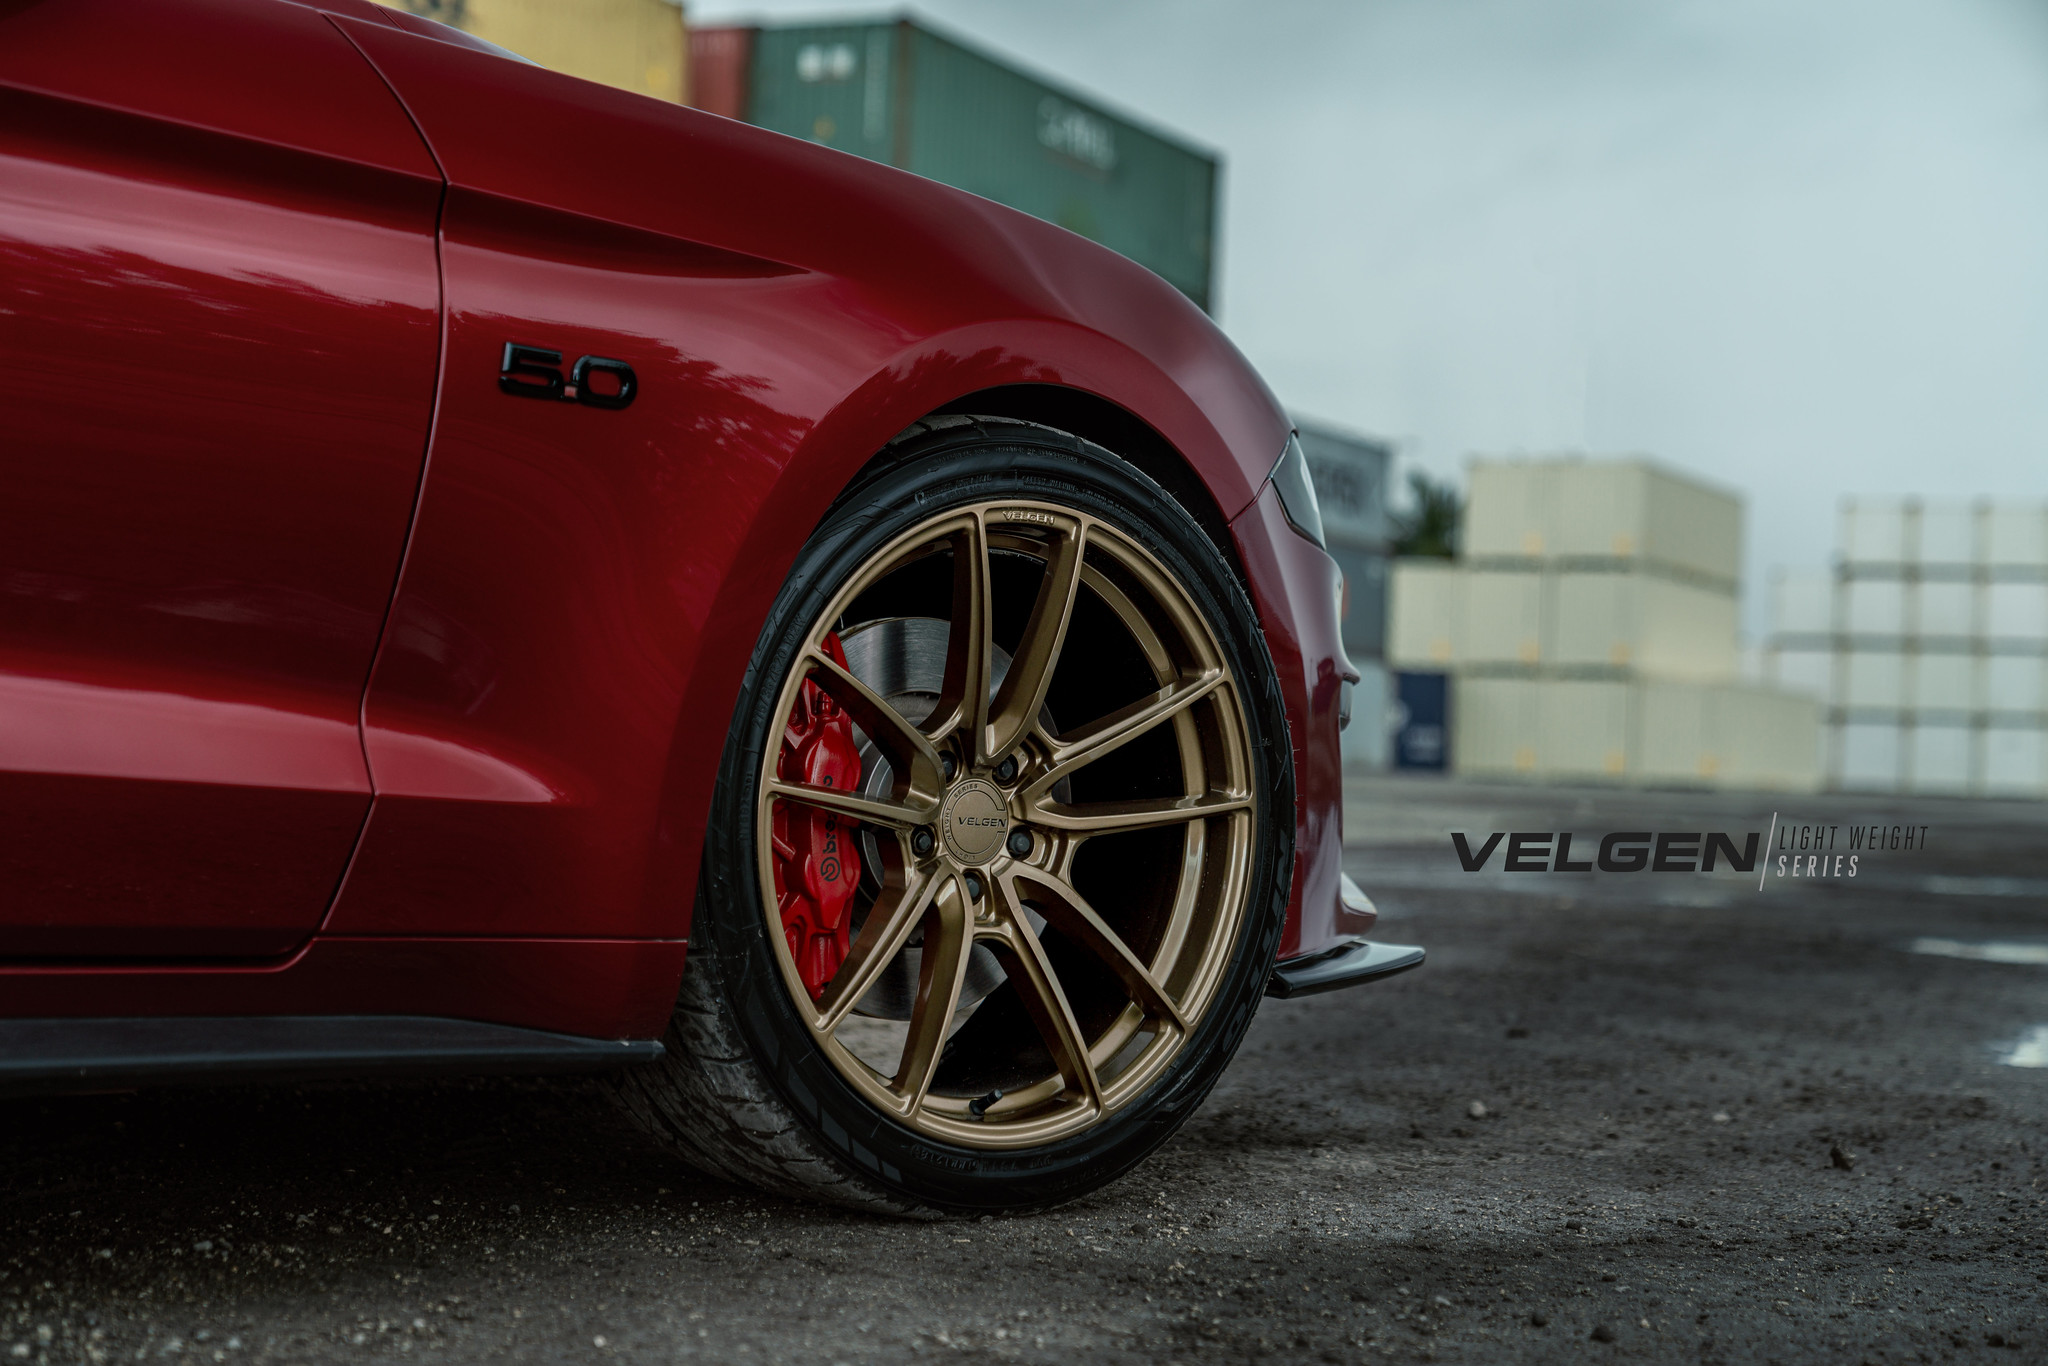 S650 Mustang 19" 20" Velgen Flow Forged Concave Wheels Mustang S650 - Vibe Motorsports Official Thread 48678895502_aa5eb4bad6_k